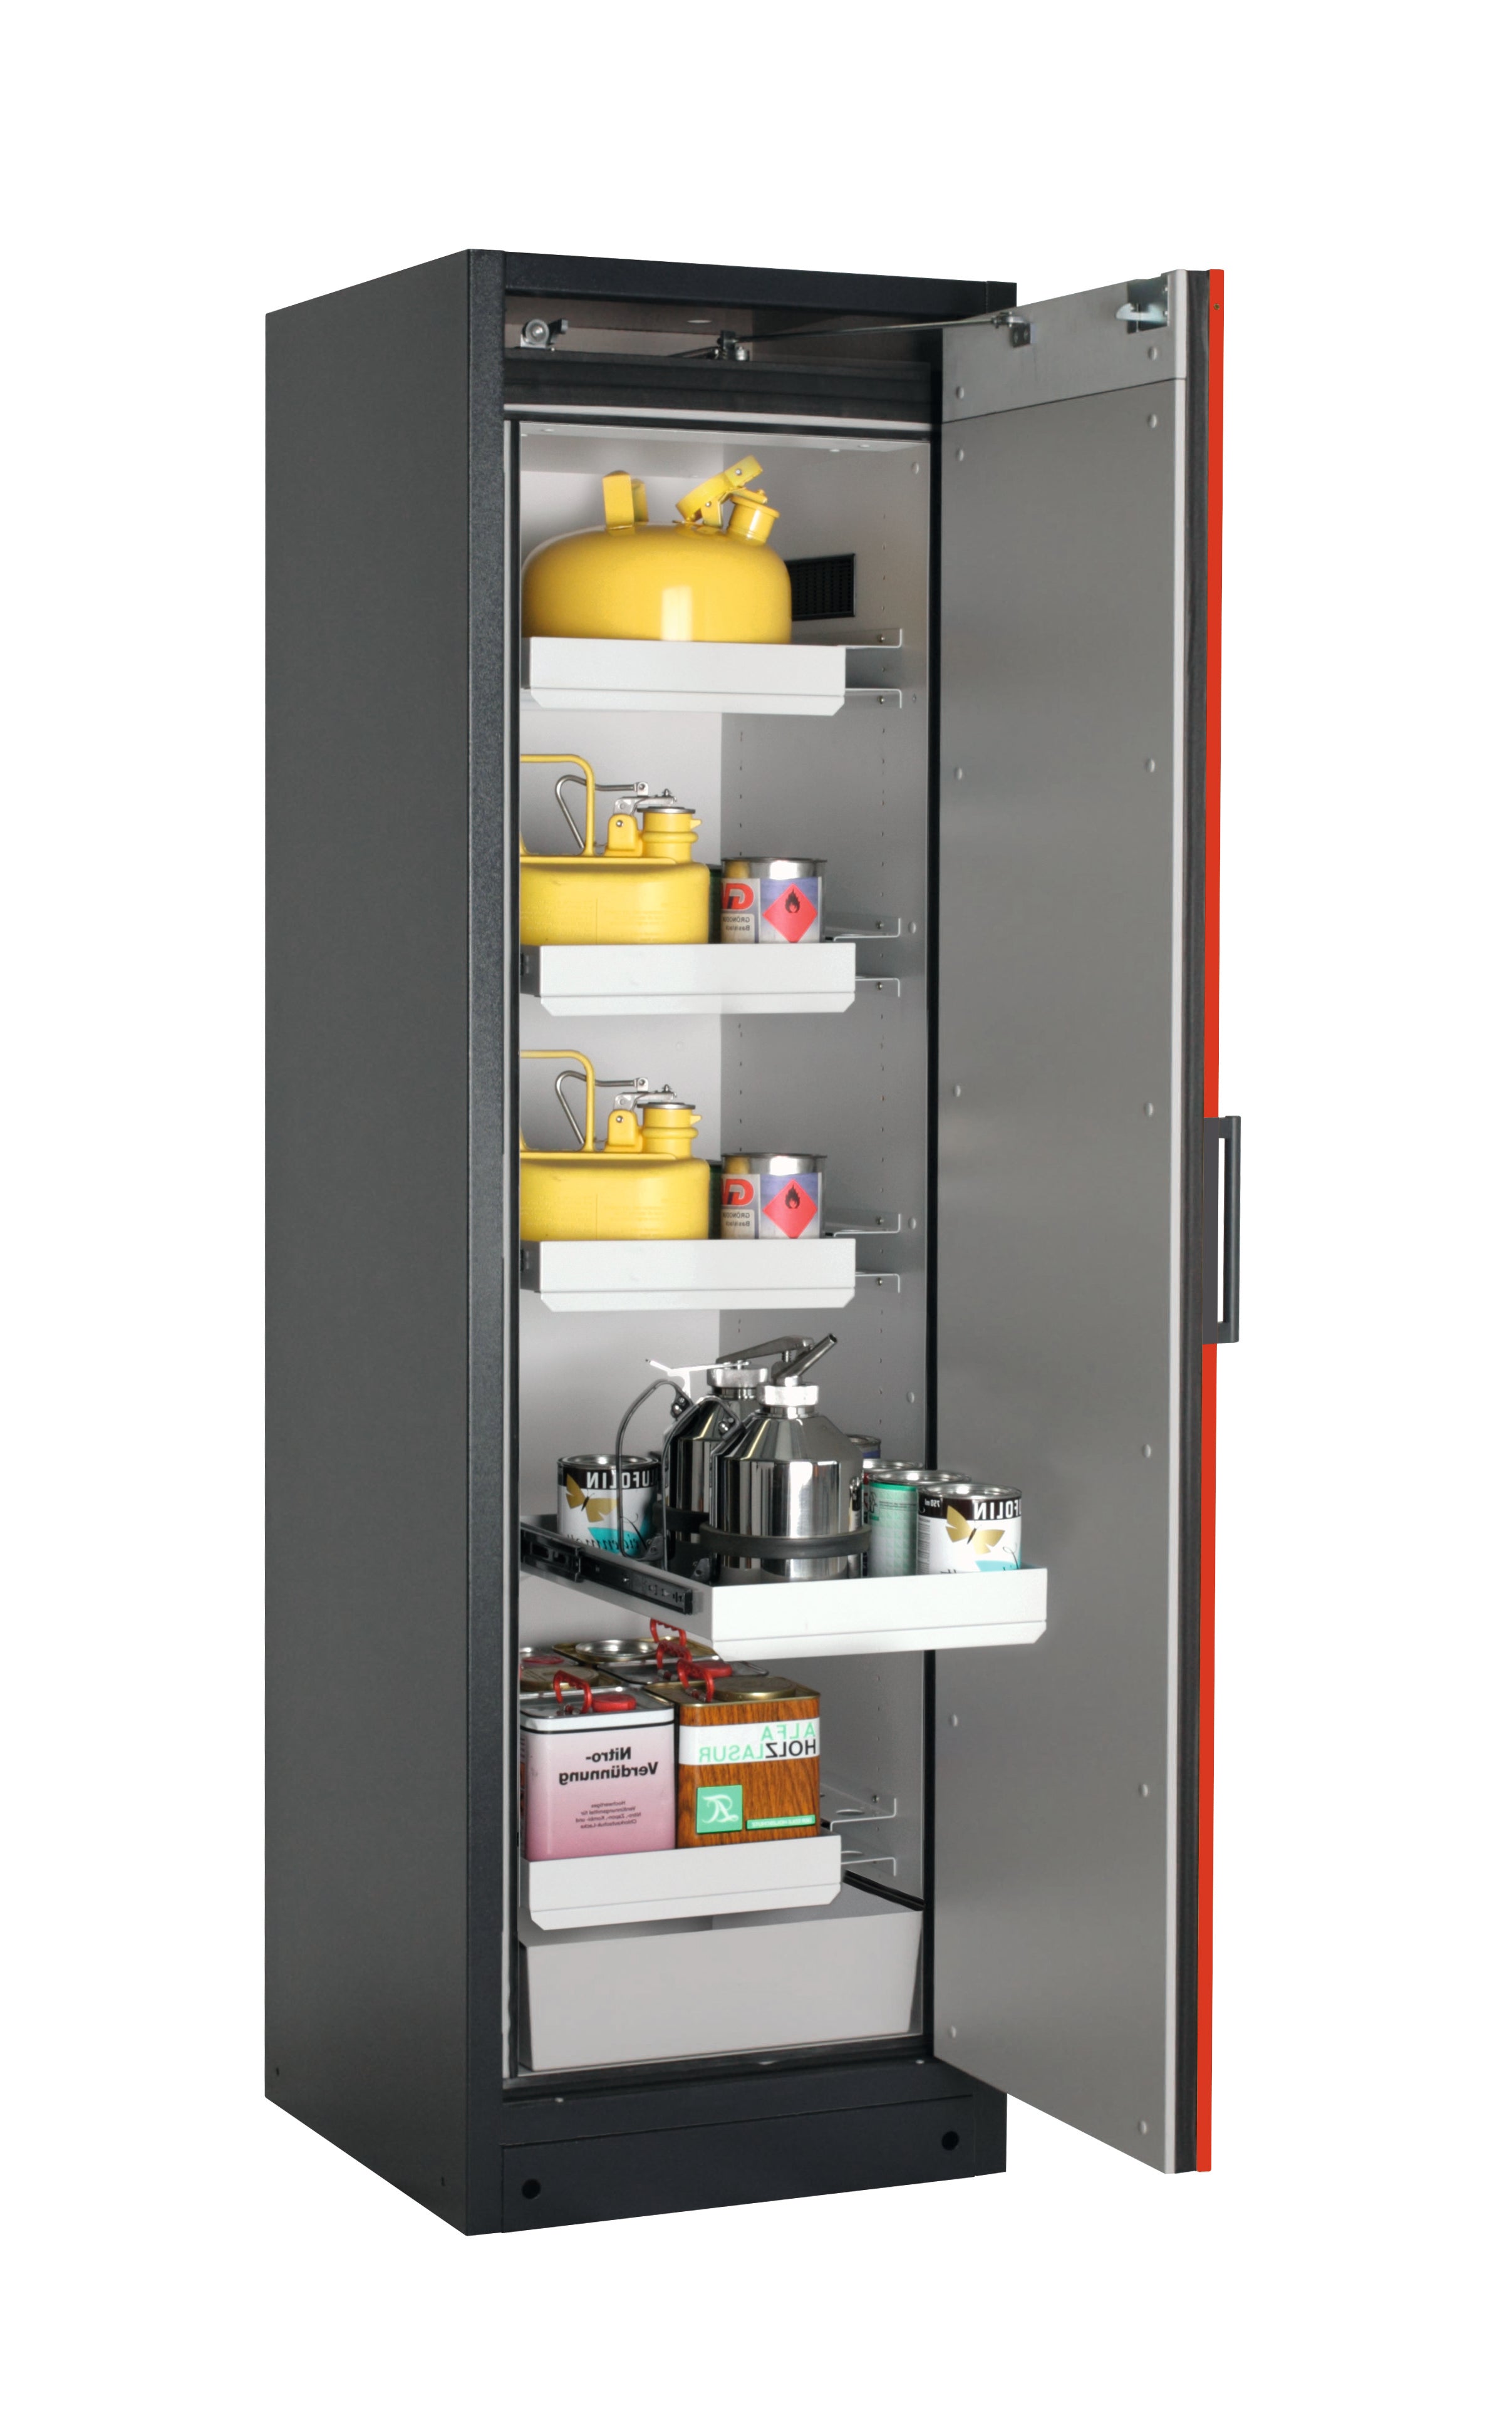 Type 90 safety storage cabinet Q-PEGASUS-90 model Q90.195.060.WDACR in traffic red RAL 3020 with 4x drawer (standard) (sheet steel),